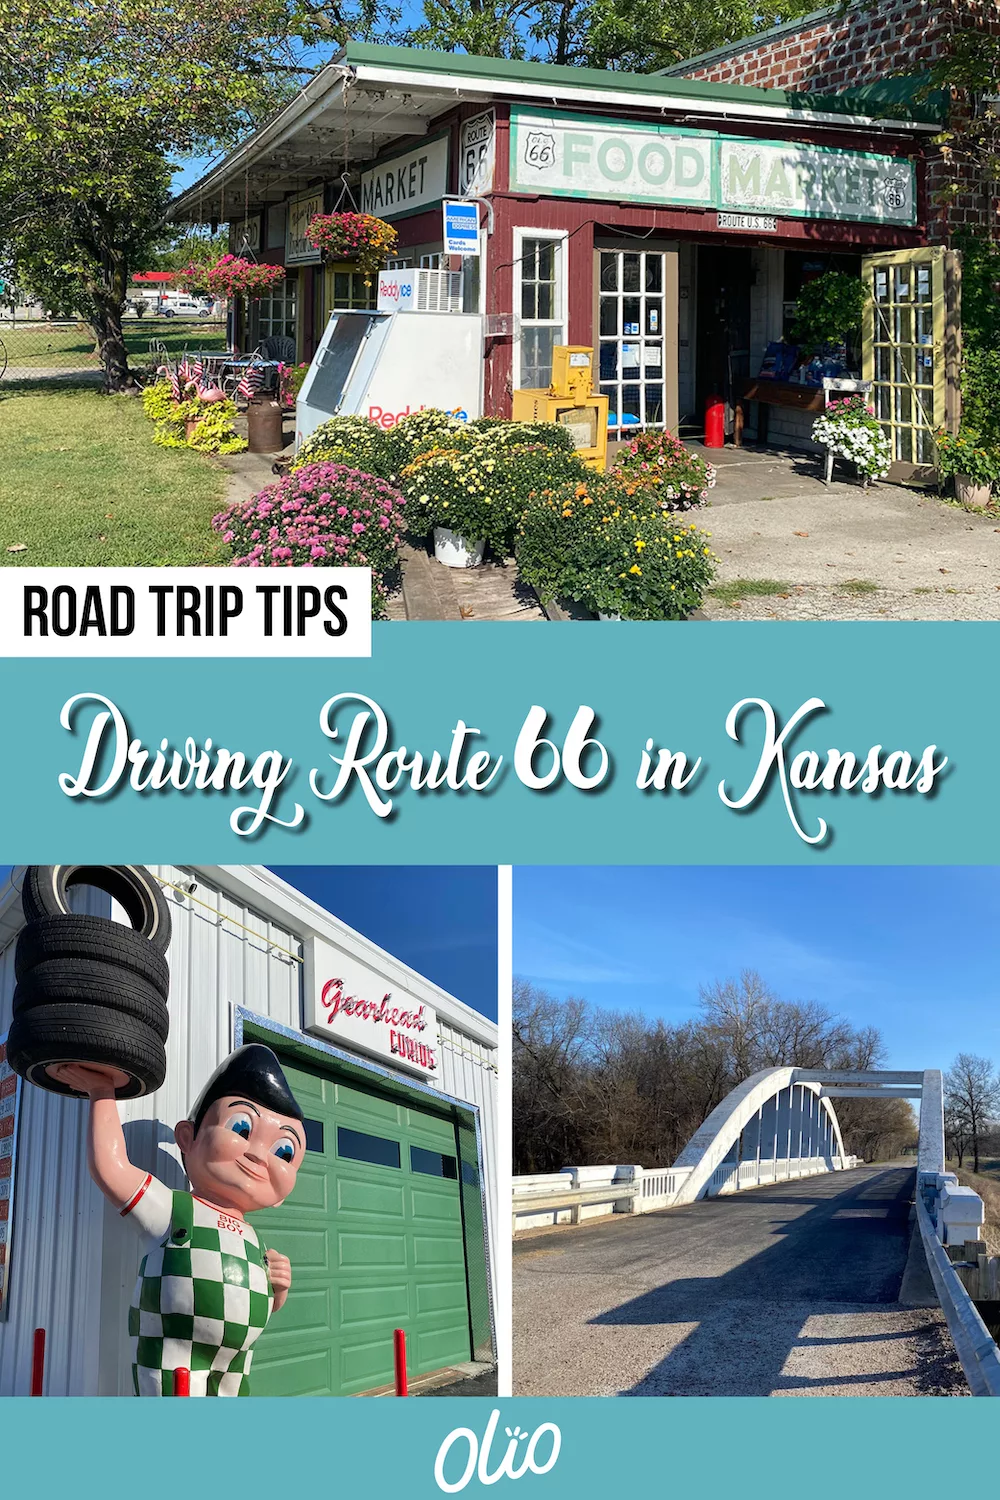 Get your kicks on Route 66 in Kansas! While the Sunflower State only has 13.2 miles of the Mother Road, there’s still plenty of things to see while driving Route 66. This post includes everything you need to plan your road trip along Route 66 in Kansas. From must-see attractions to places to eat and drink to incredible accommodations, be sure to bookmark this comprehensive guide to help with your Route 66 road trip planning. #Route66 #Kansas